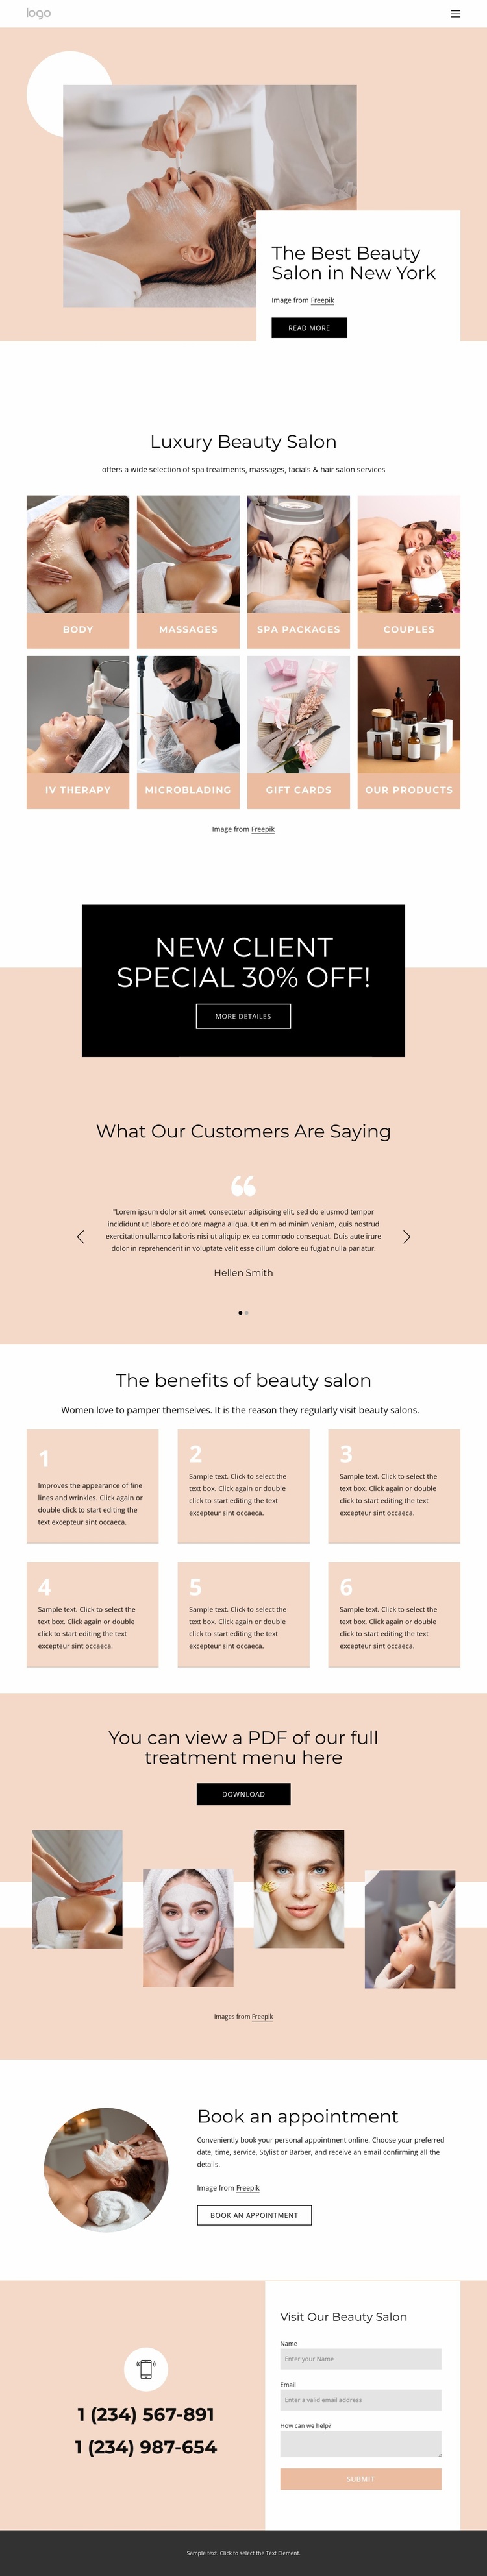 The best beauty salon in NYC eCommerce Template